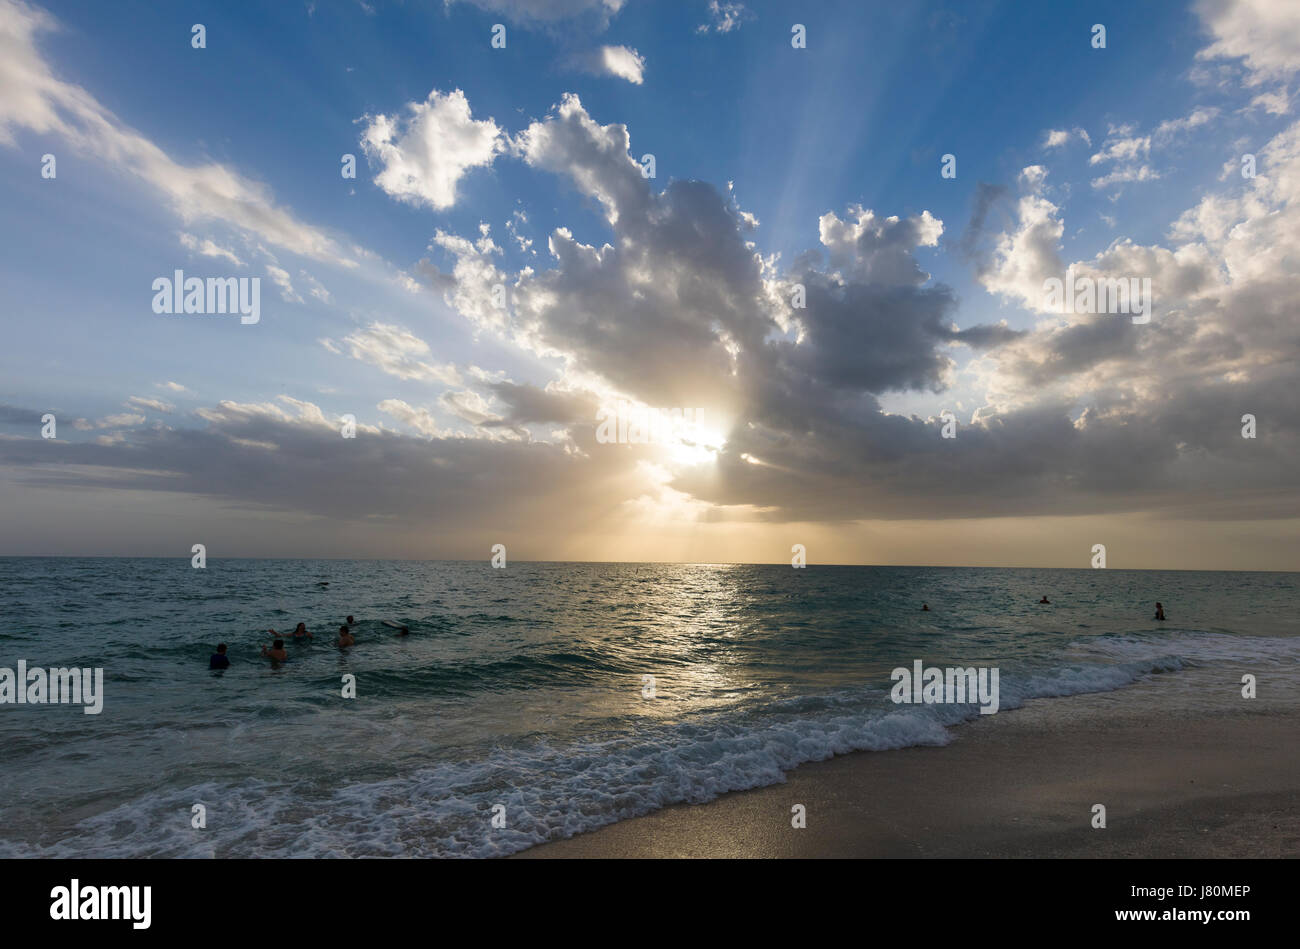 Late afternoon sunset over the Gulf of Mexico from Venice Beach in Vencie Florida Stock Photo